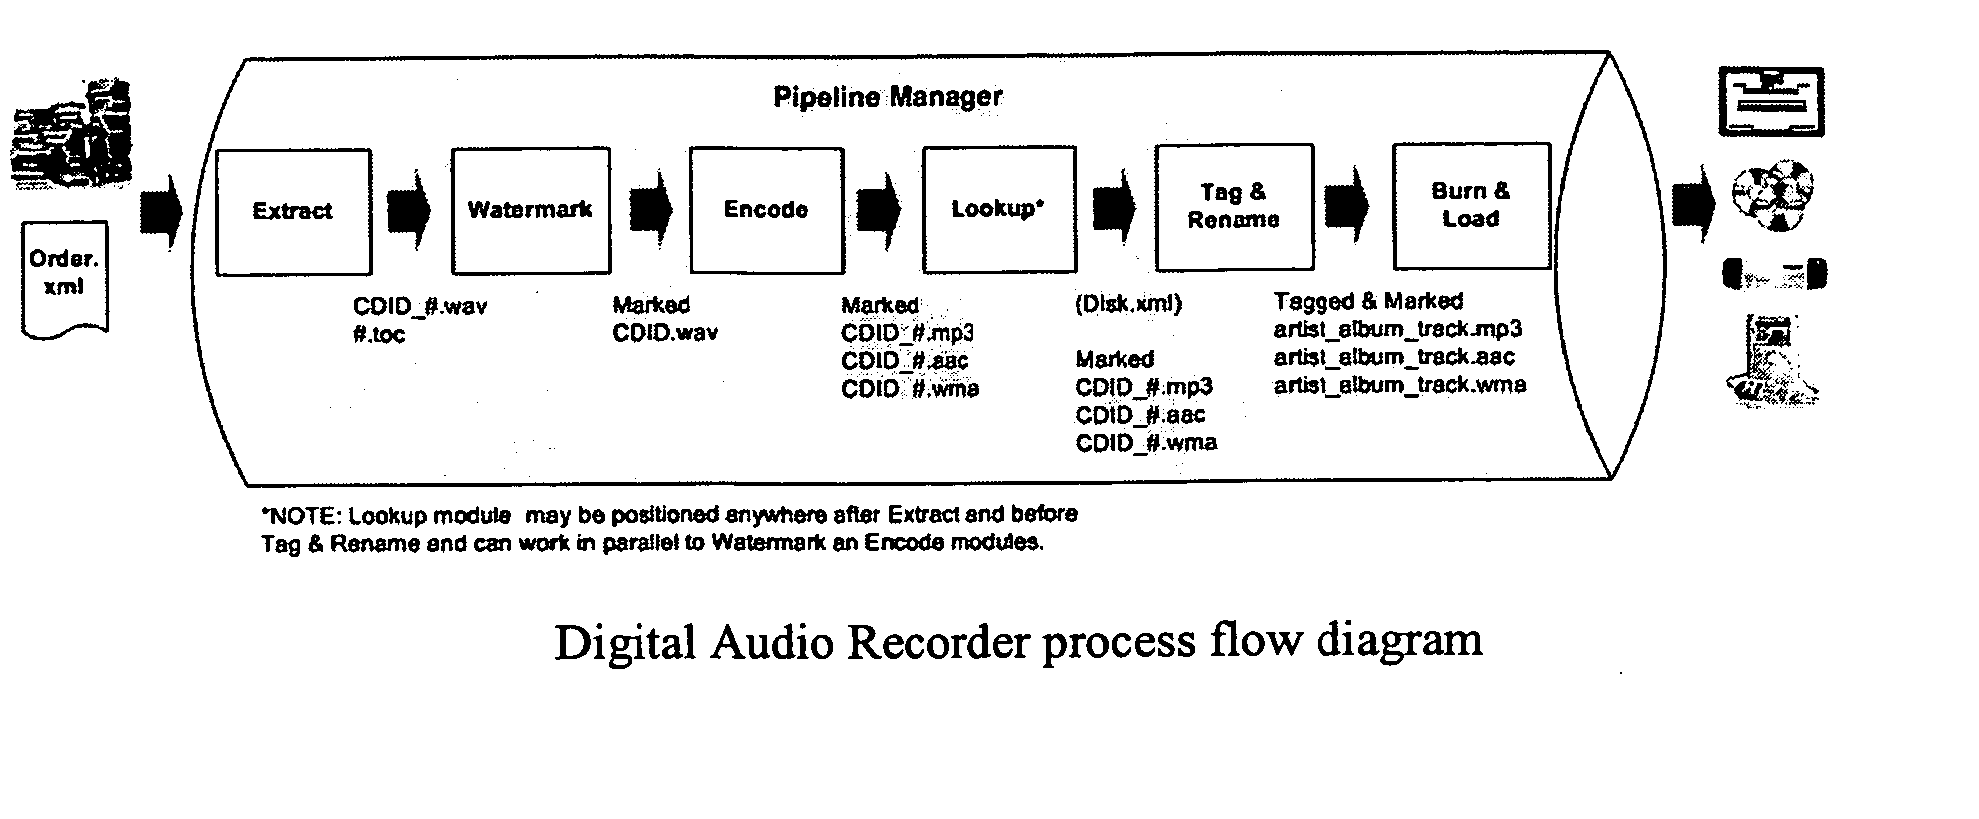 Digital audio recorder for CD collections